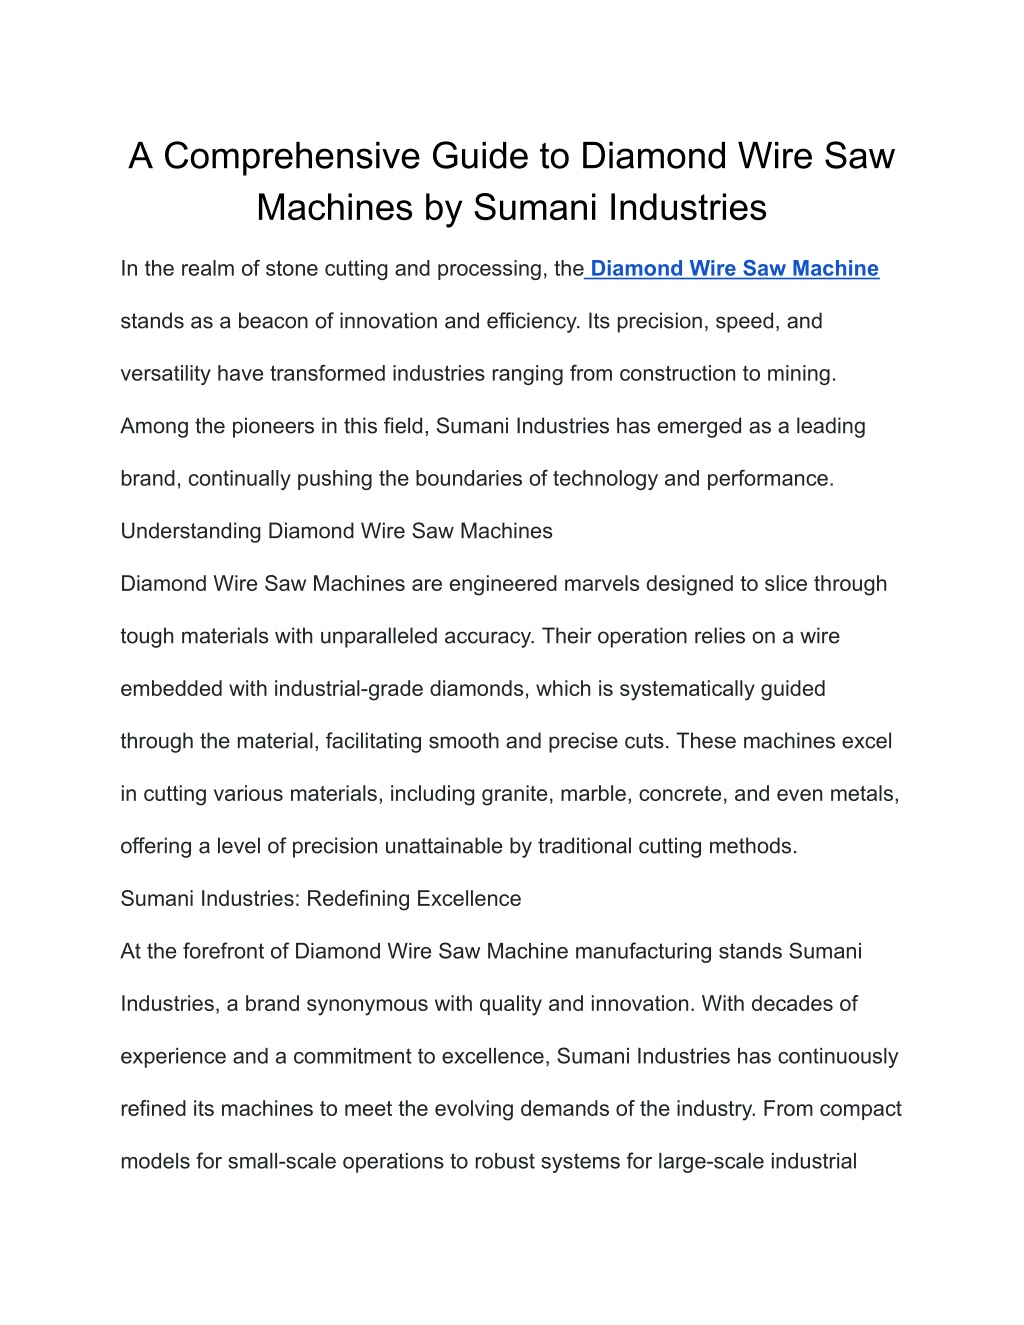 PPT - A Comprehensive Guide to Diamond Wire Saw Machines by Sumani ...